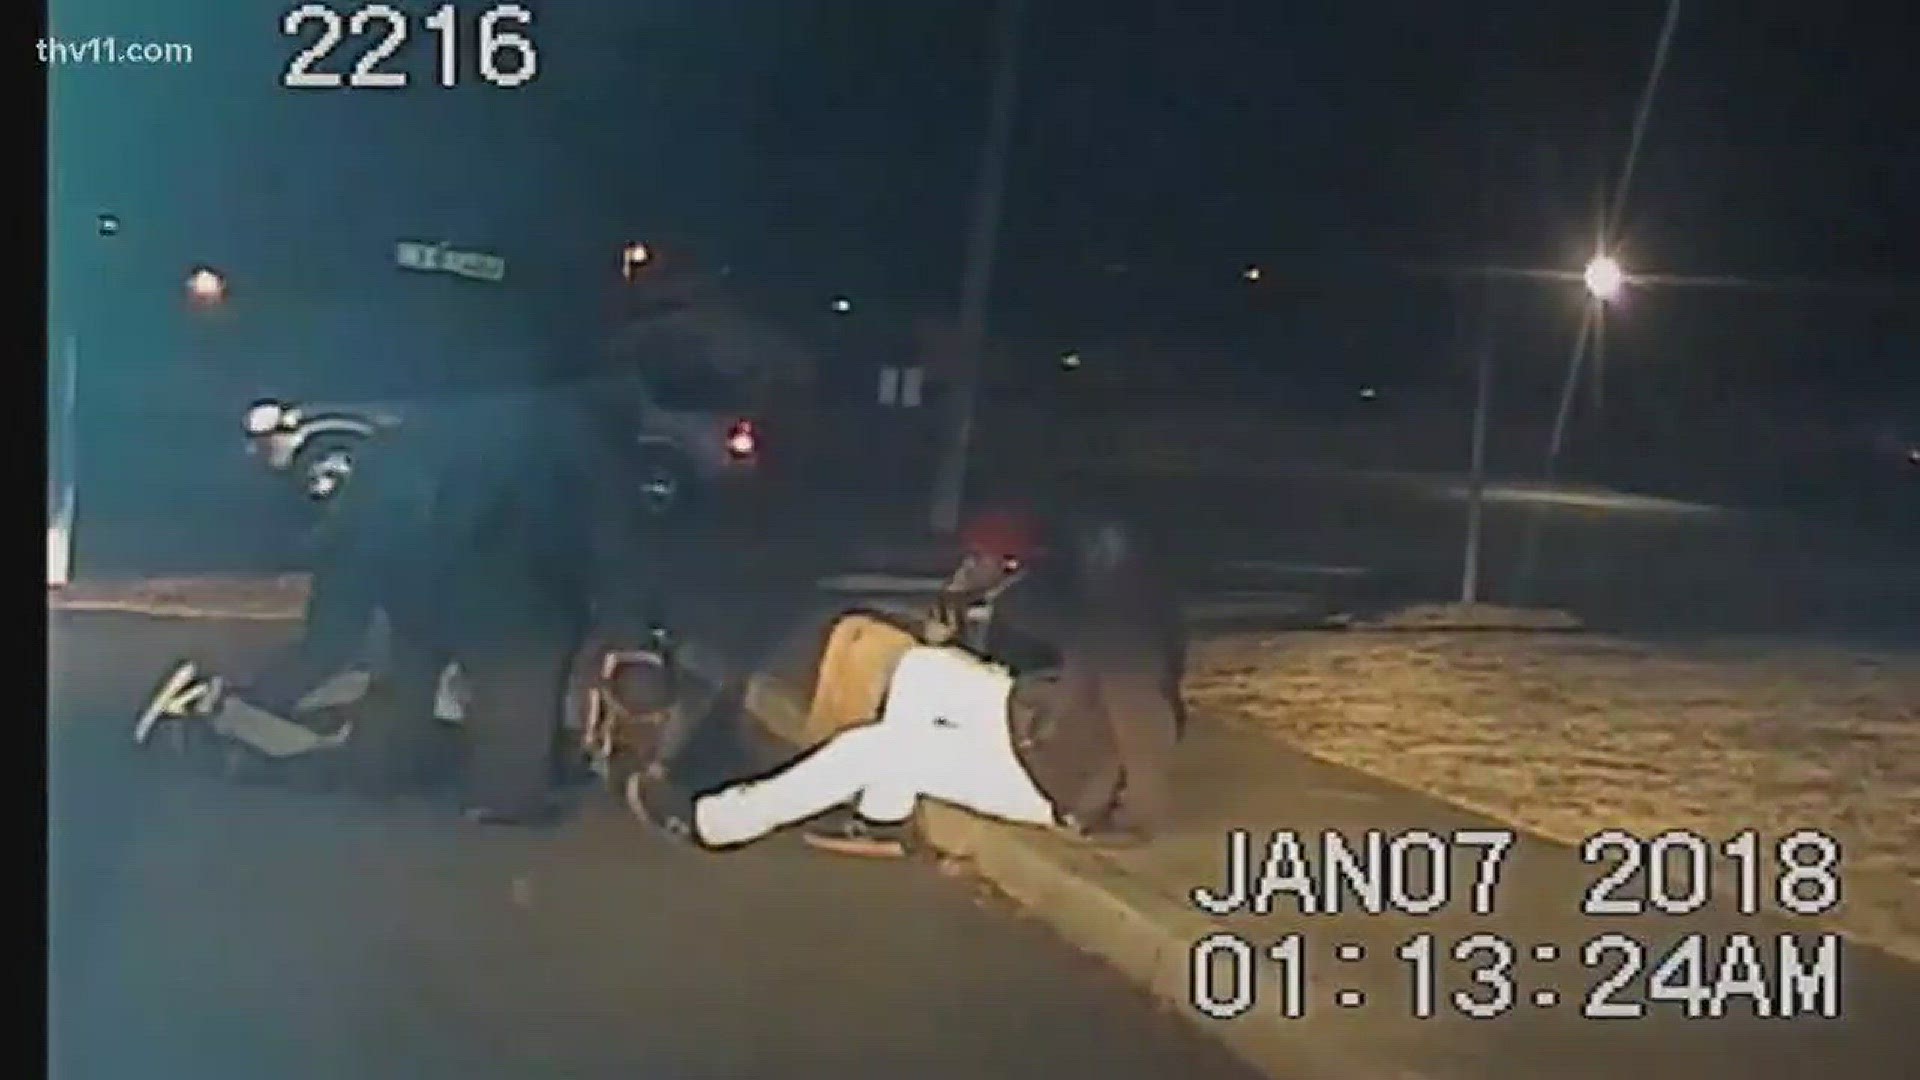 We explain the choices we made in showing the video of the North Little Rock police dash cam video in which Charles "CJ" Smith is shot and killed.